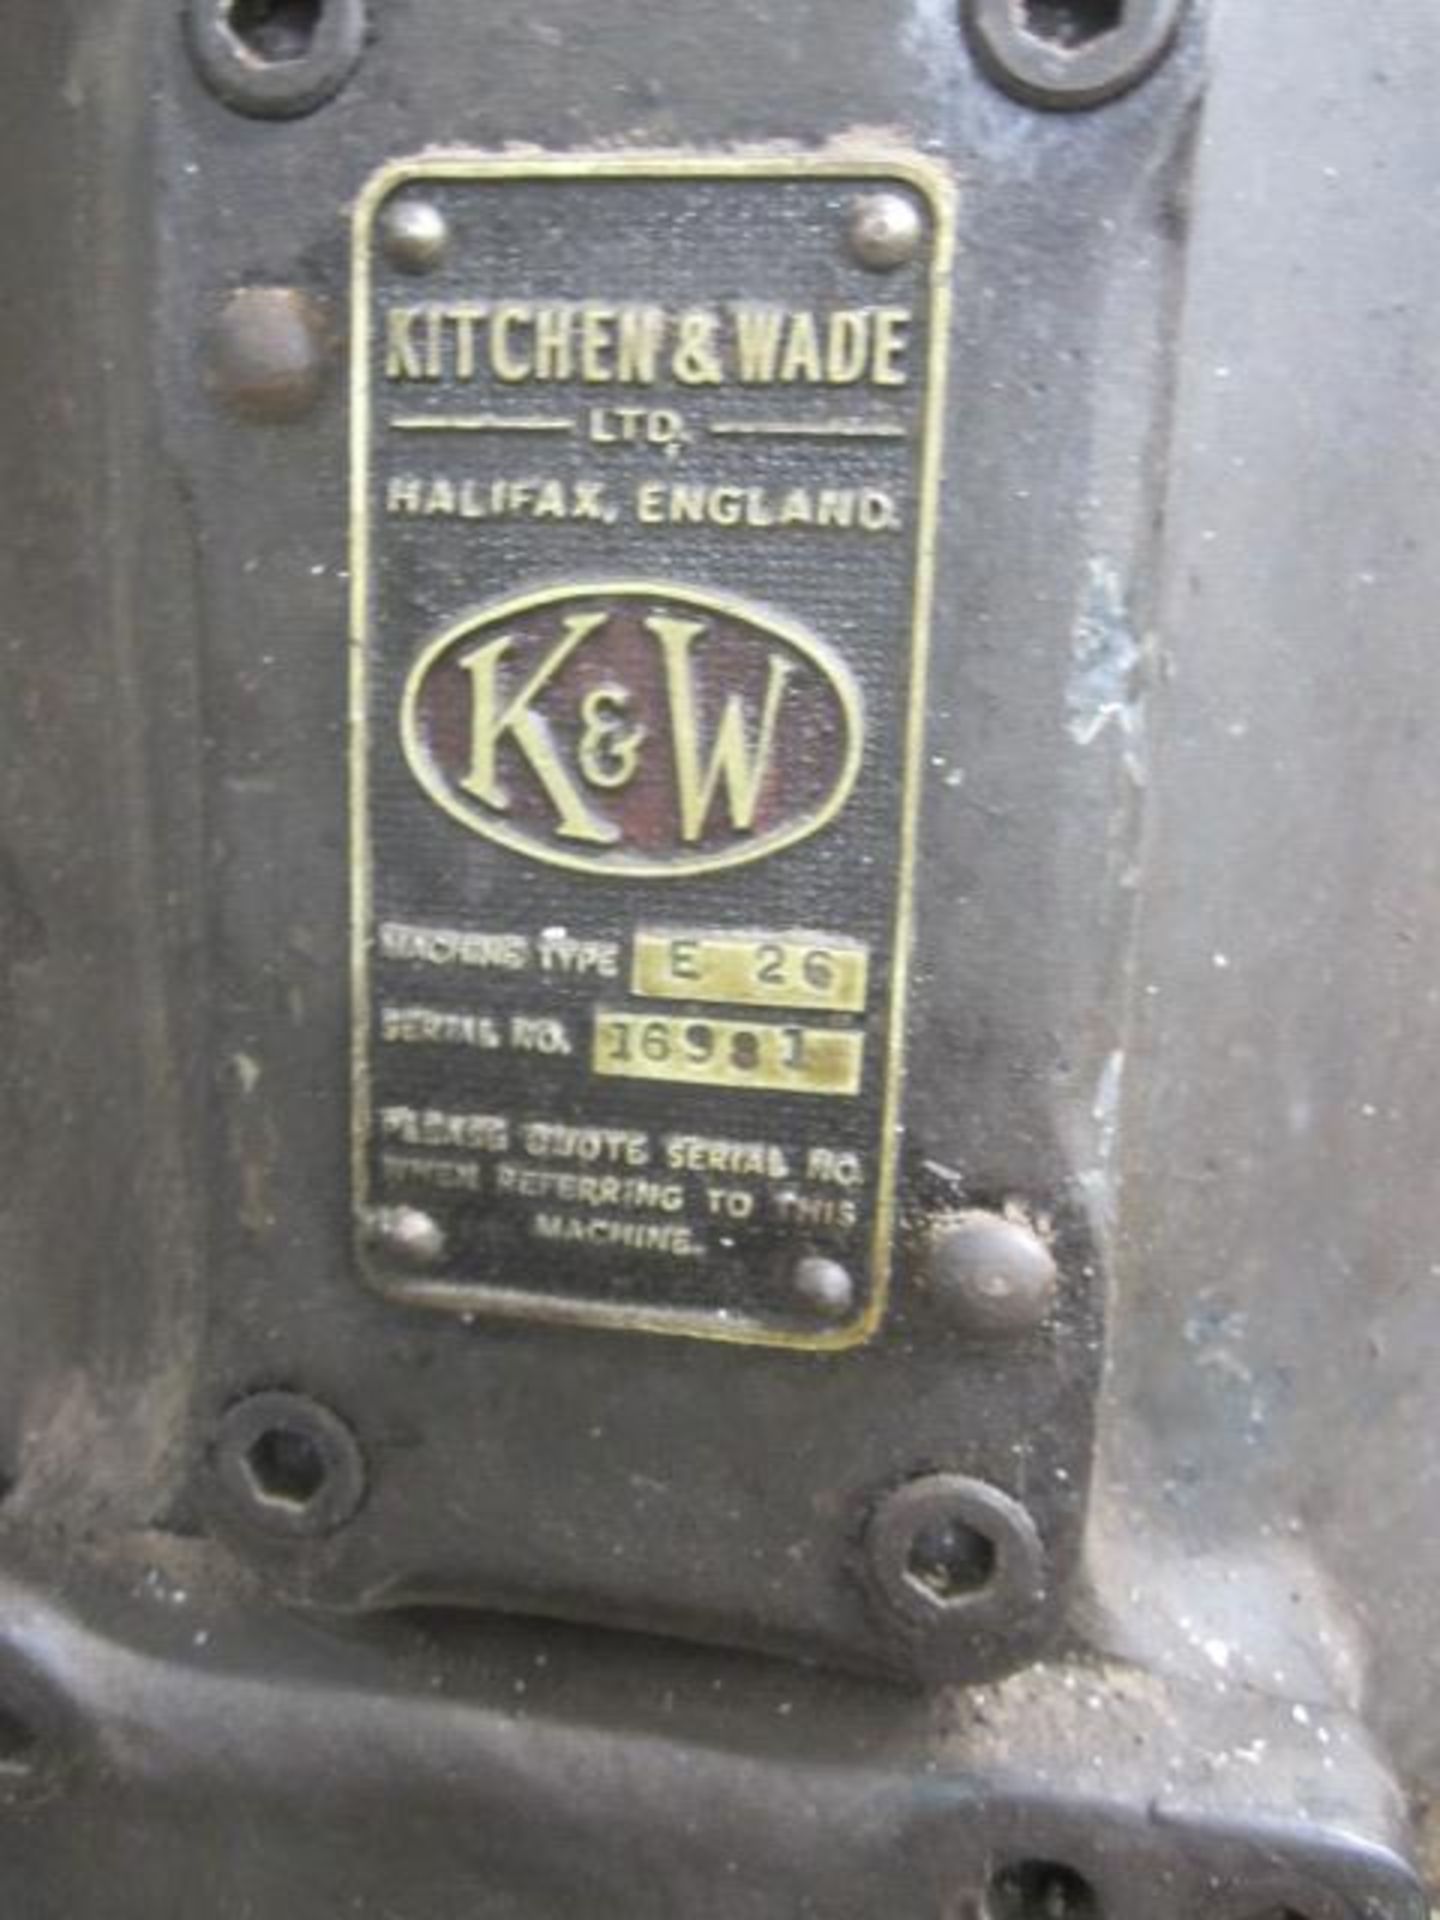 Kitchen & Walker E26 elevating column radial arm drill, serial no. 16981, circa 48" swing, with - Image 5 of 7